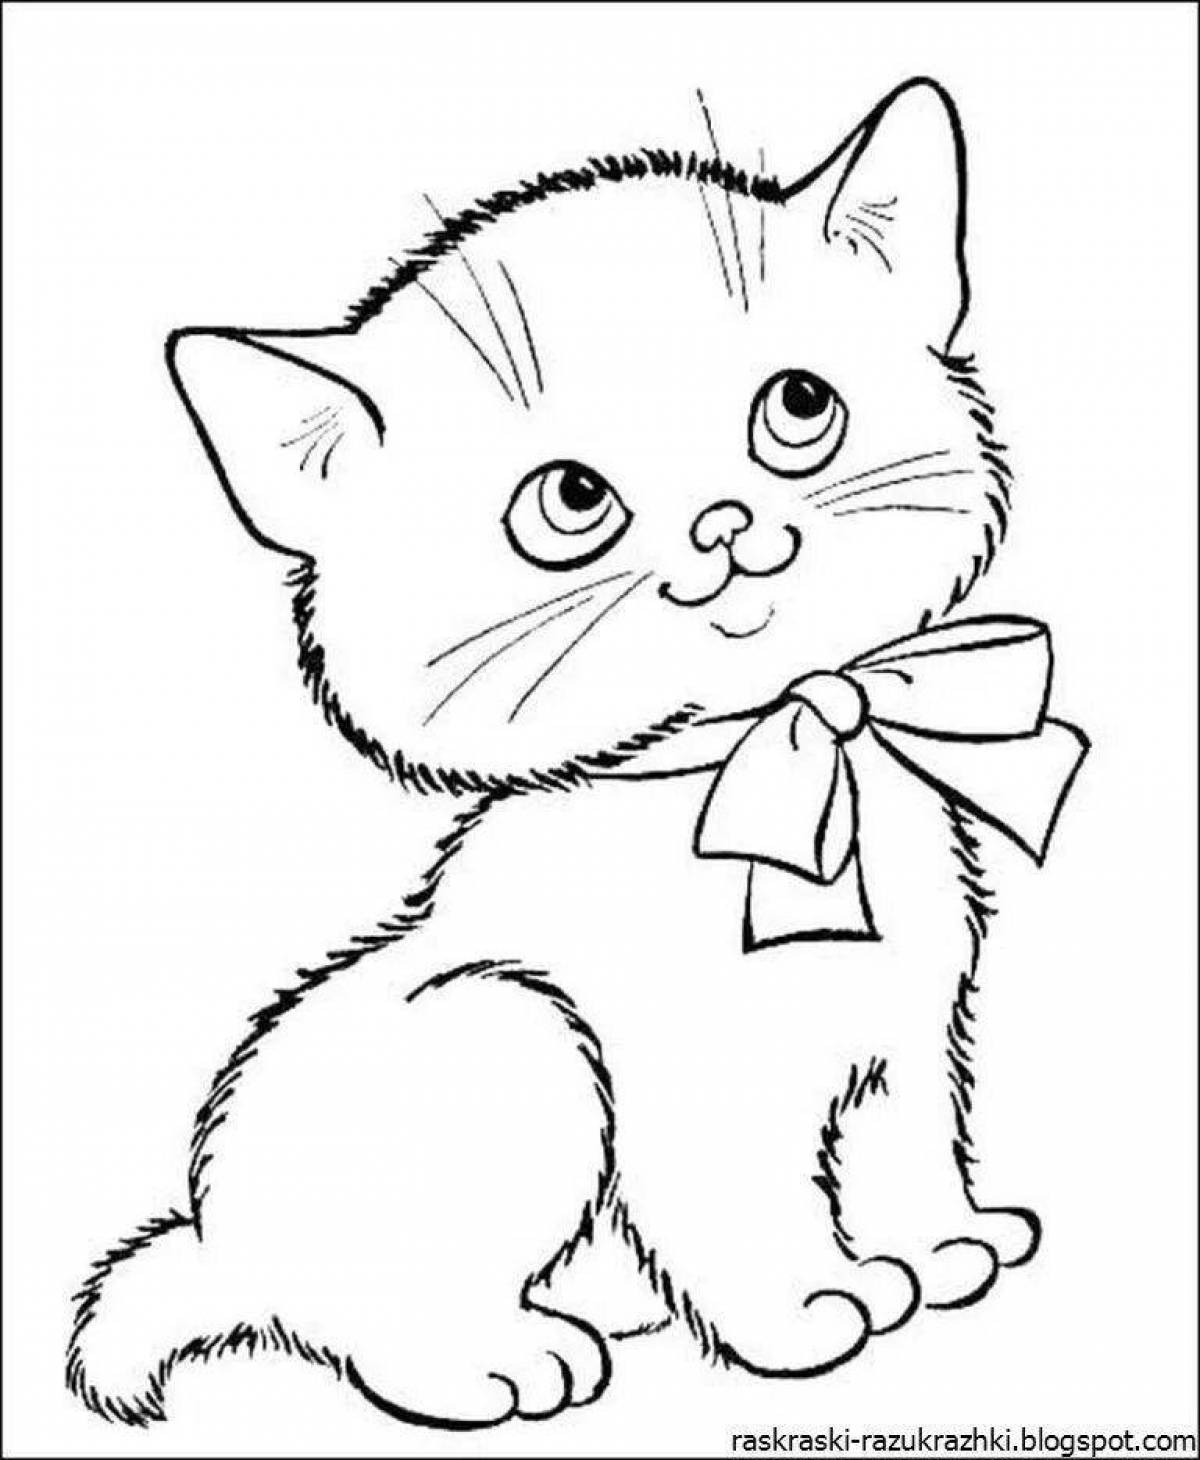 Coloring page adorable cat with a bow